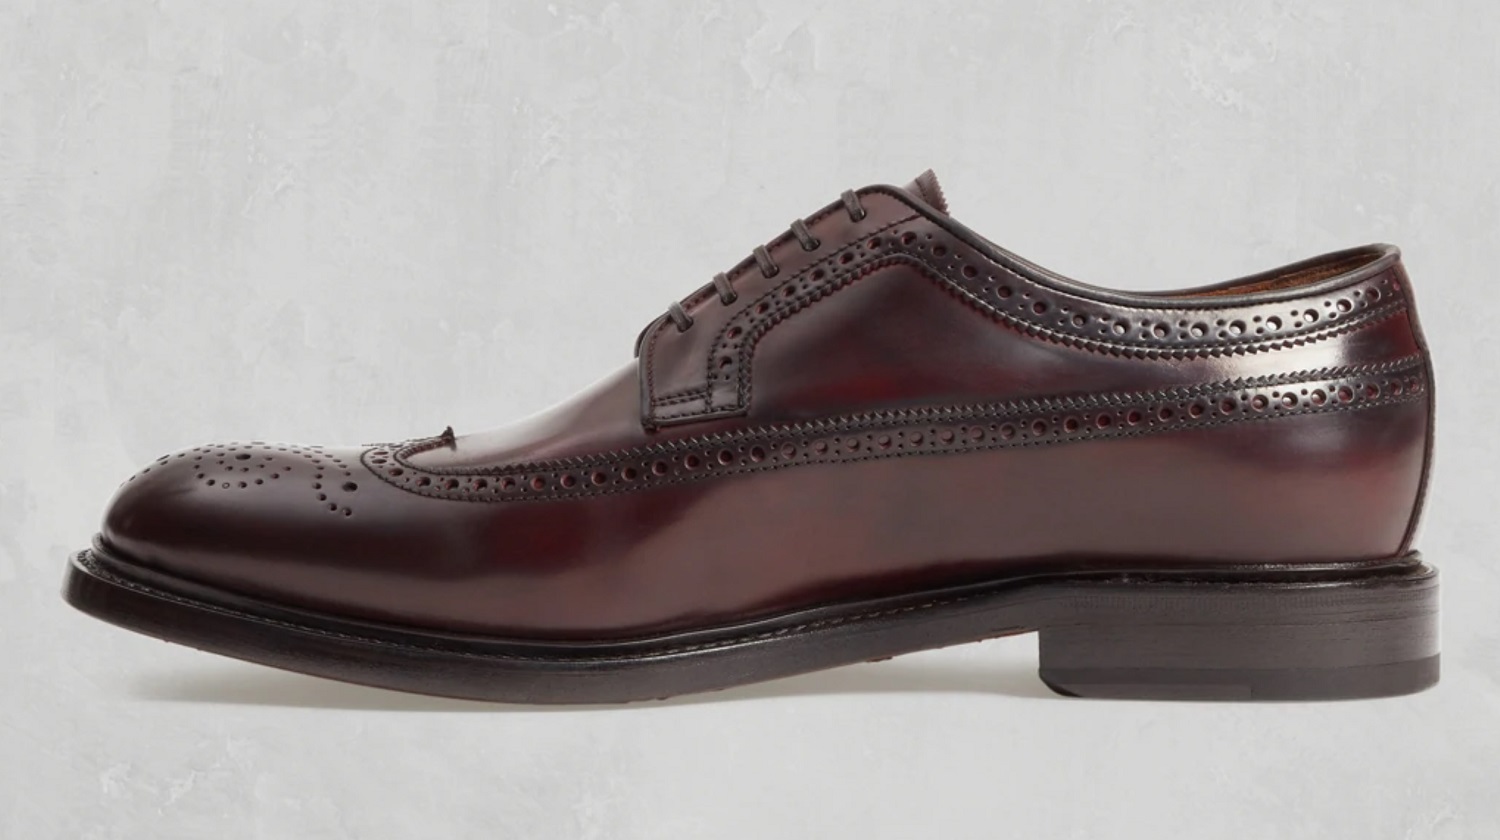 Who Makes Golden Fleece Shoes for Brooks Brothers?